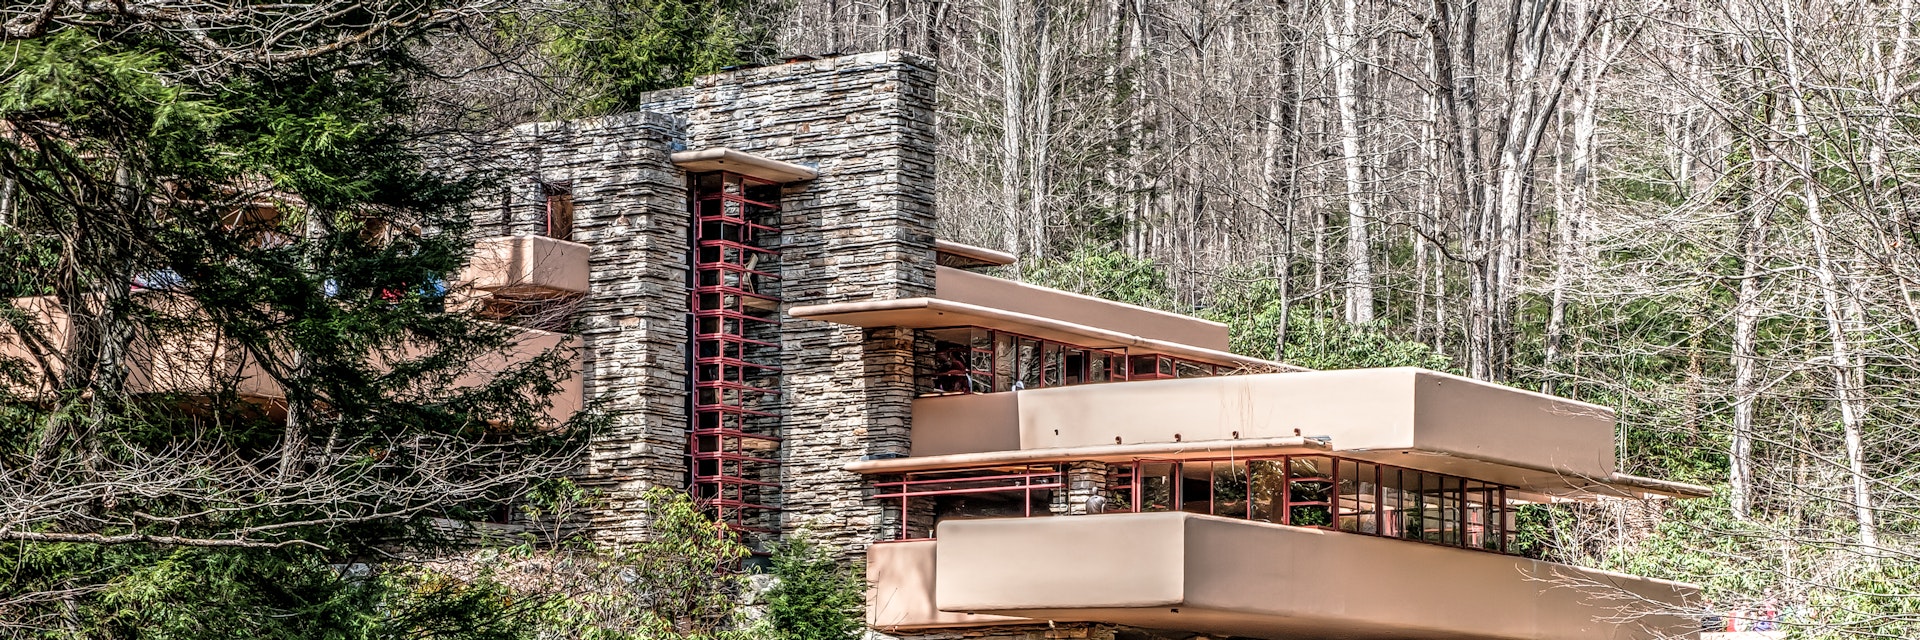 Mill Run, PA, United States - April 18, 2014: One of Frank Lloyd Wright's most famous works, Fallingwater was designed in 1935 and completed in 1937. Remarkable in that it seems to hover over a 30-foot waterfall, it is an example of Wright's organic design style. The house is well integrated with the environment, with gravity defying cantilevered balconies.